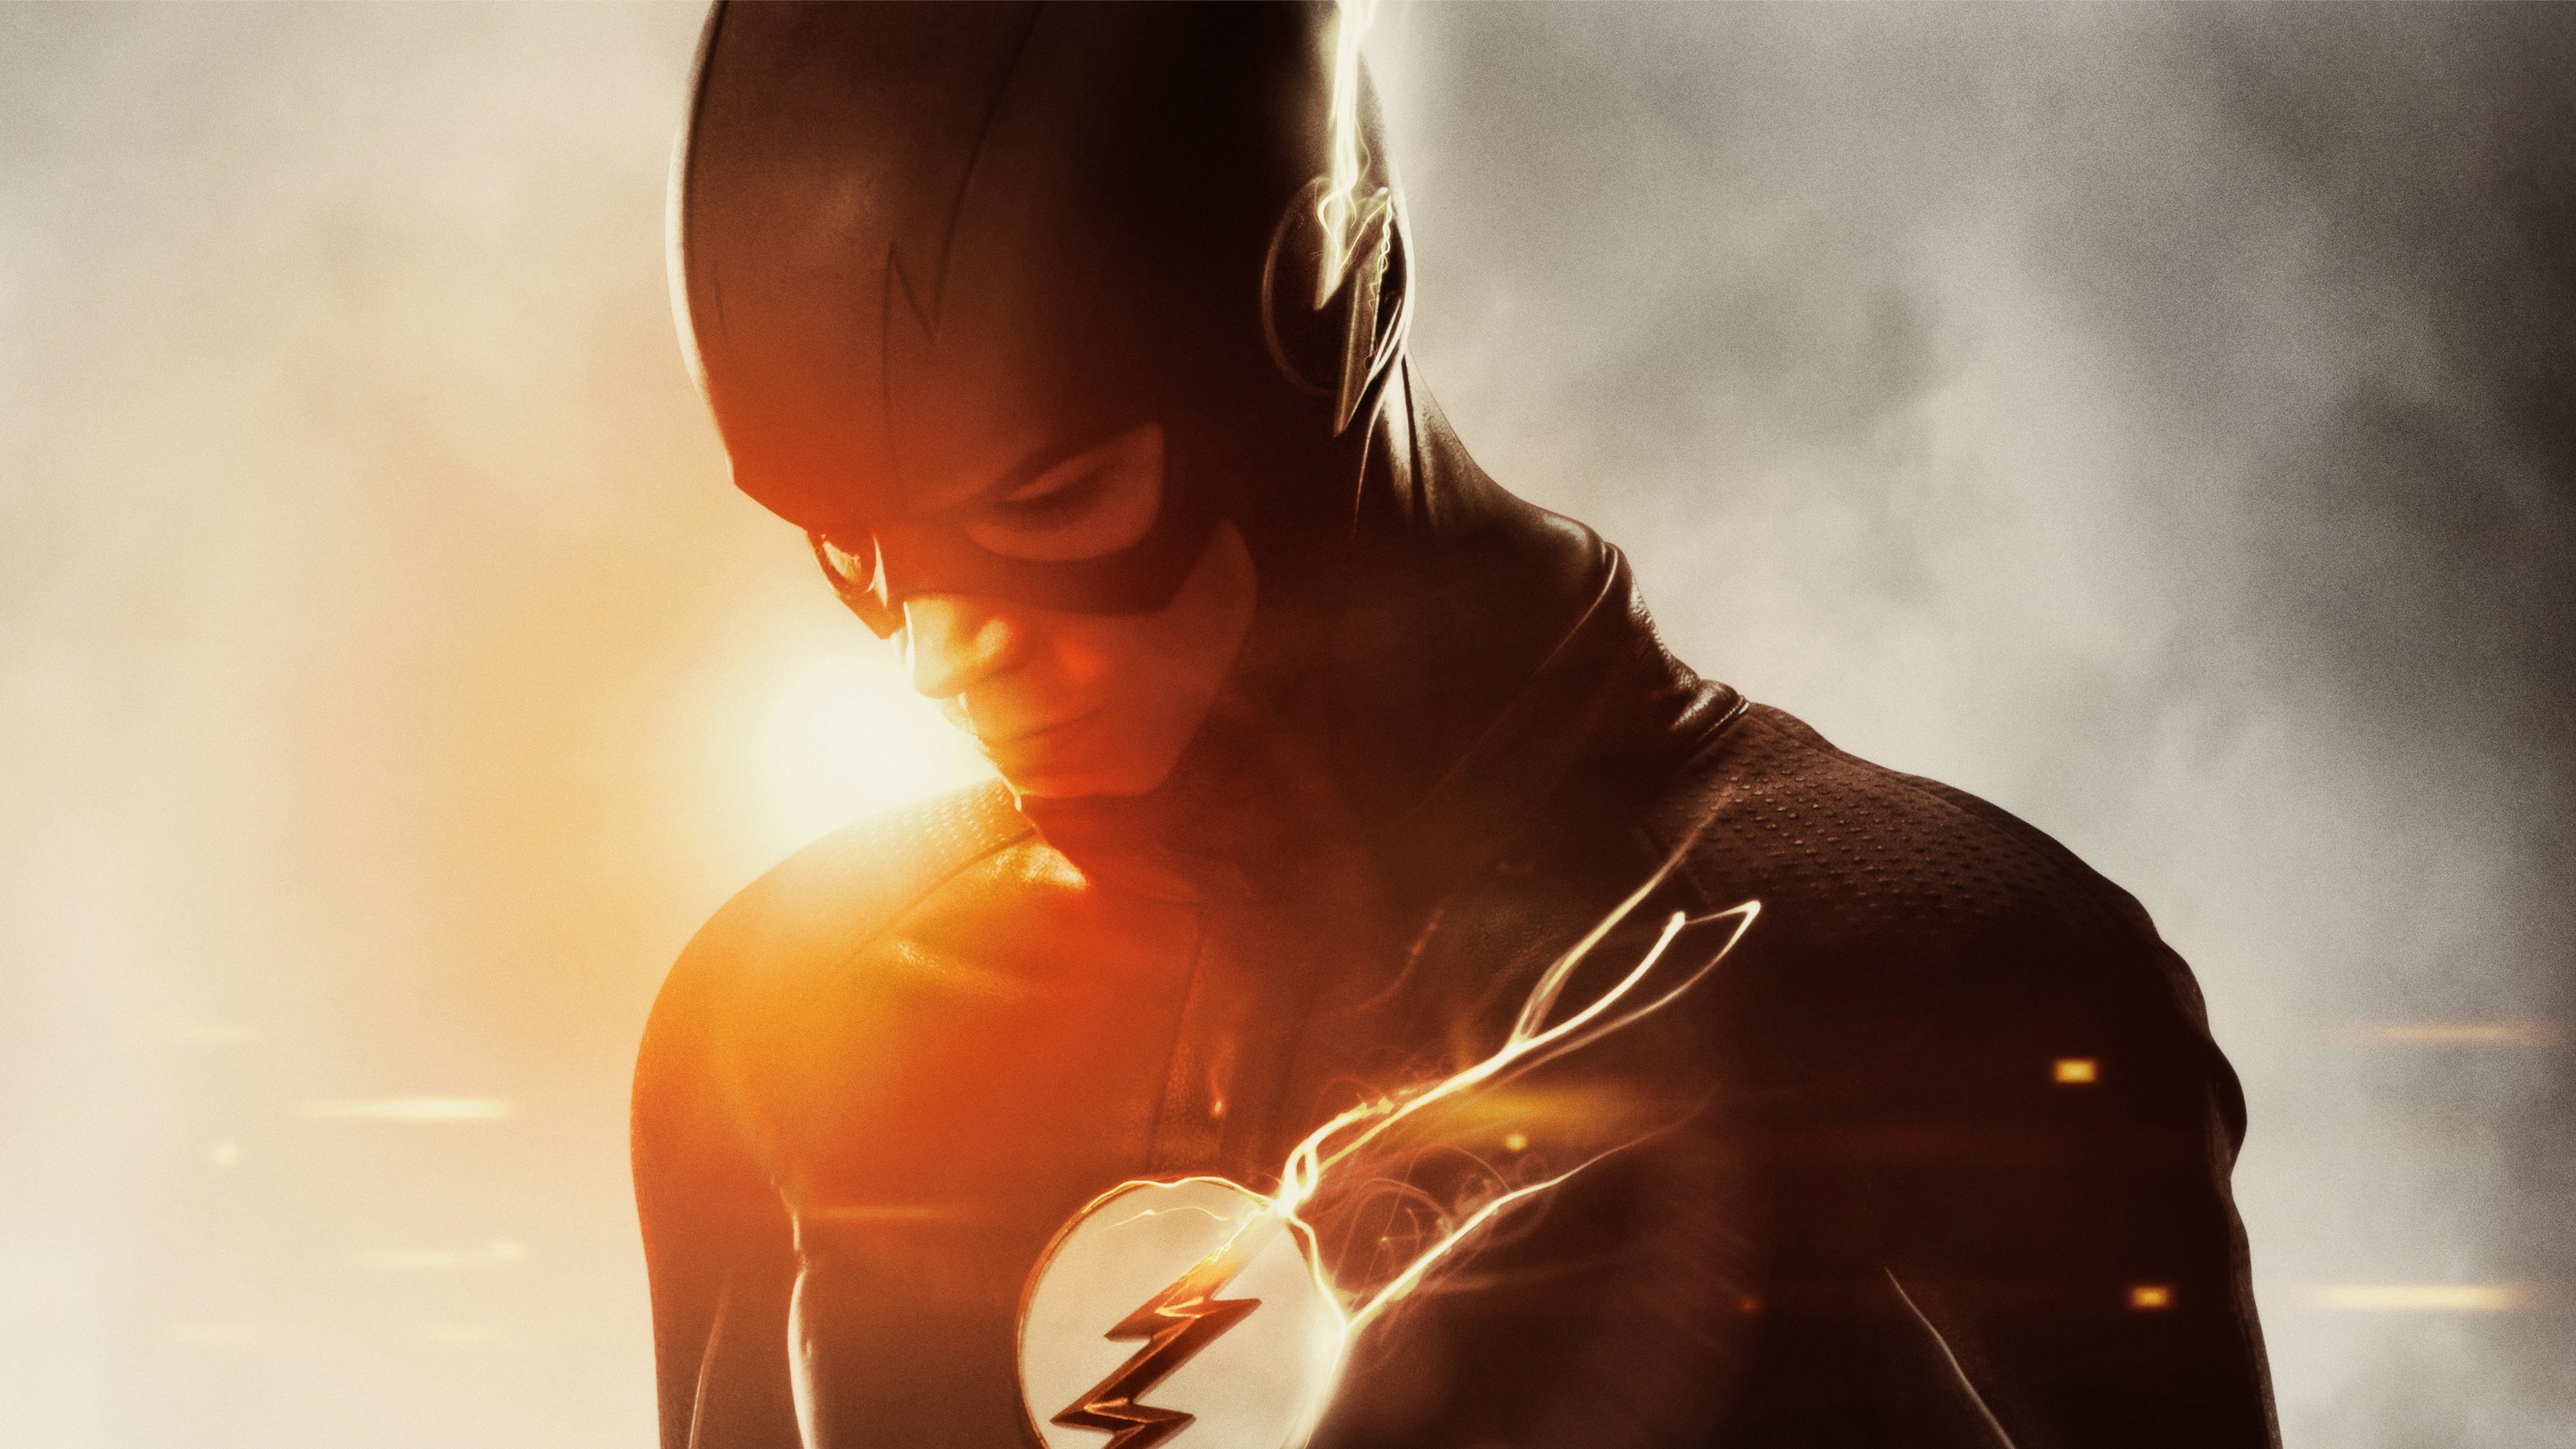 The Flash Season 2 HD Wallpapers For Android - Download hd wallpapers
